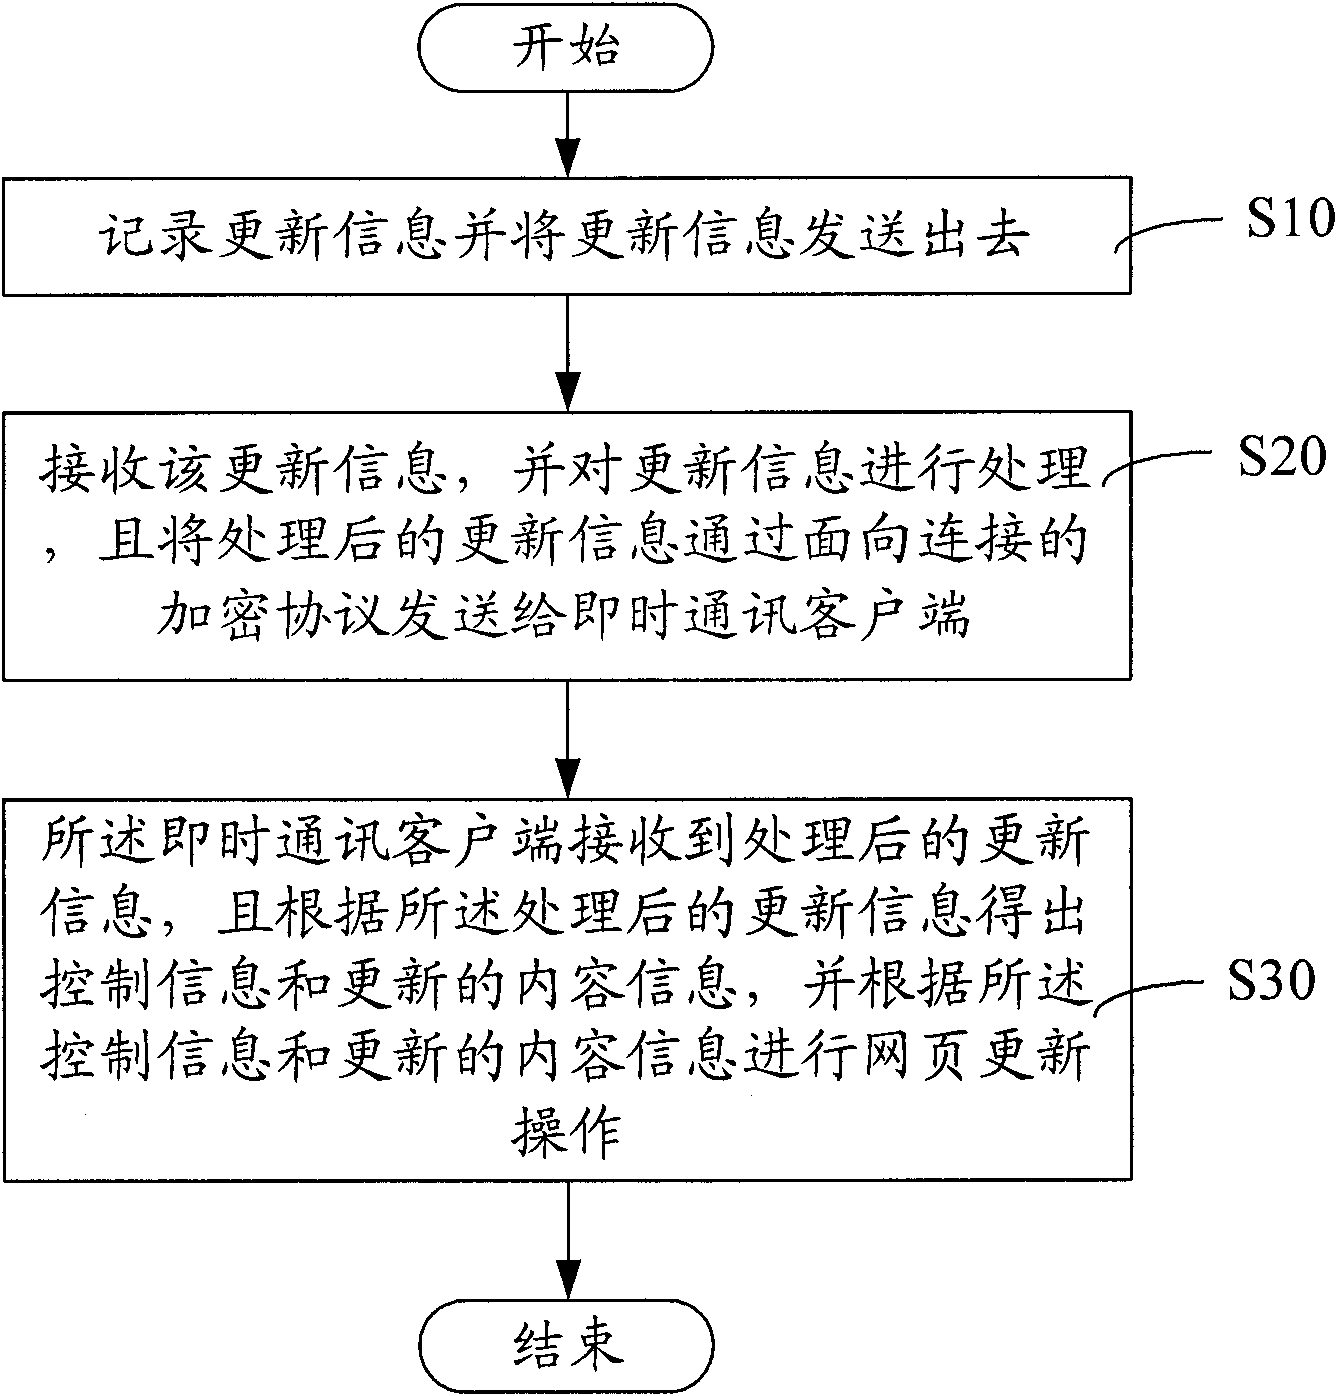 System and method for updating web data